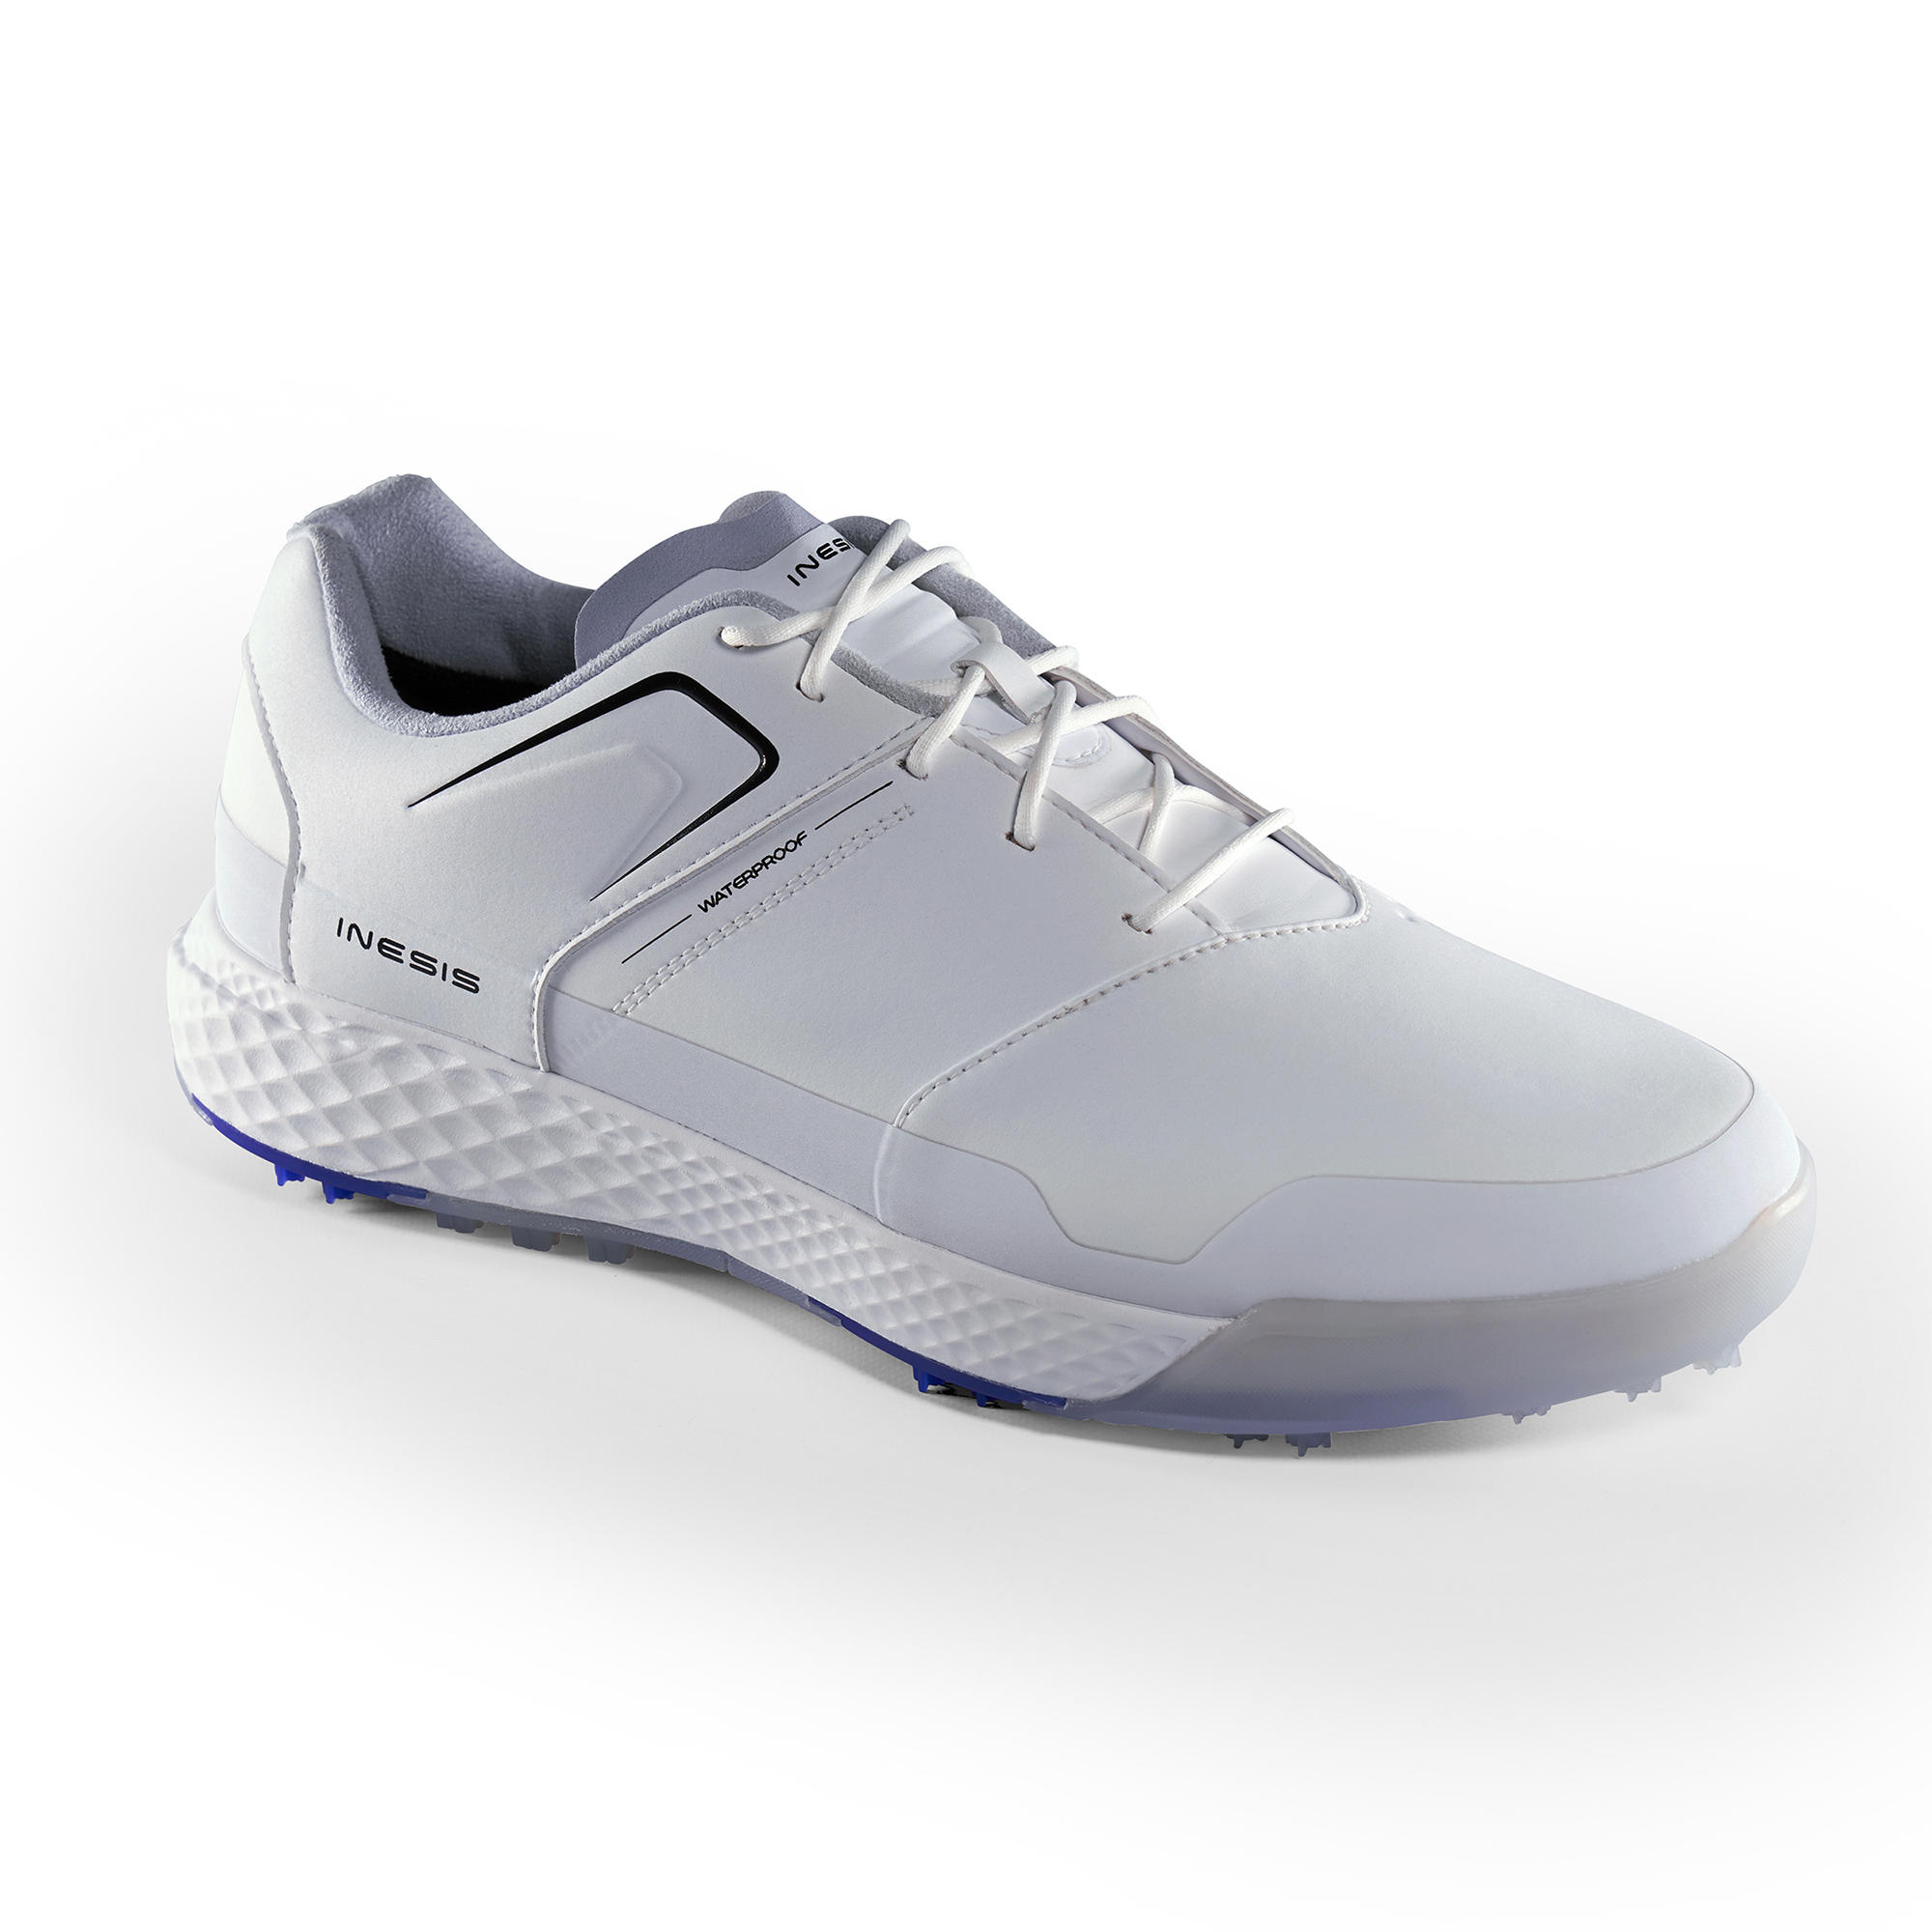 mens golf shoes on sale near me